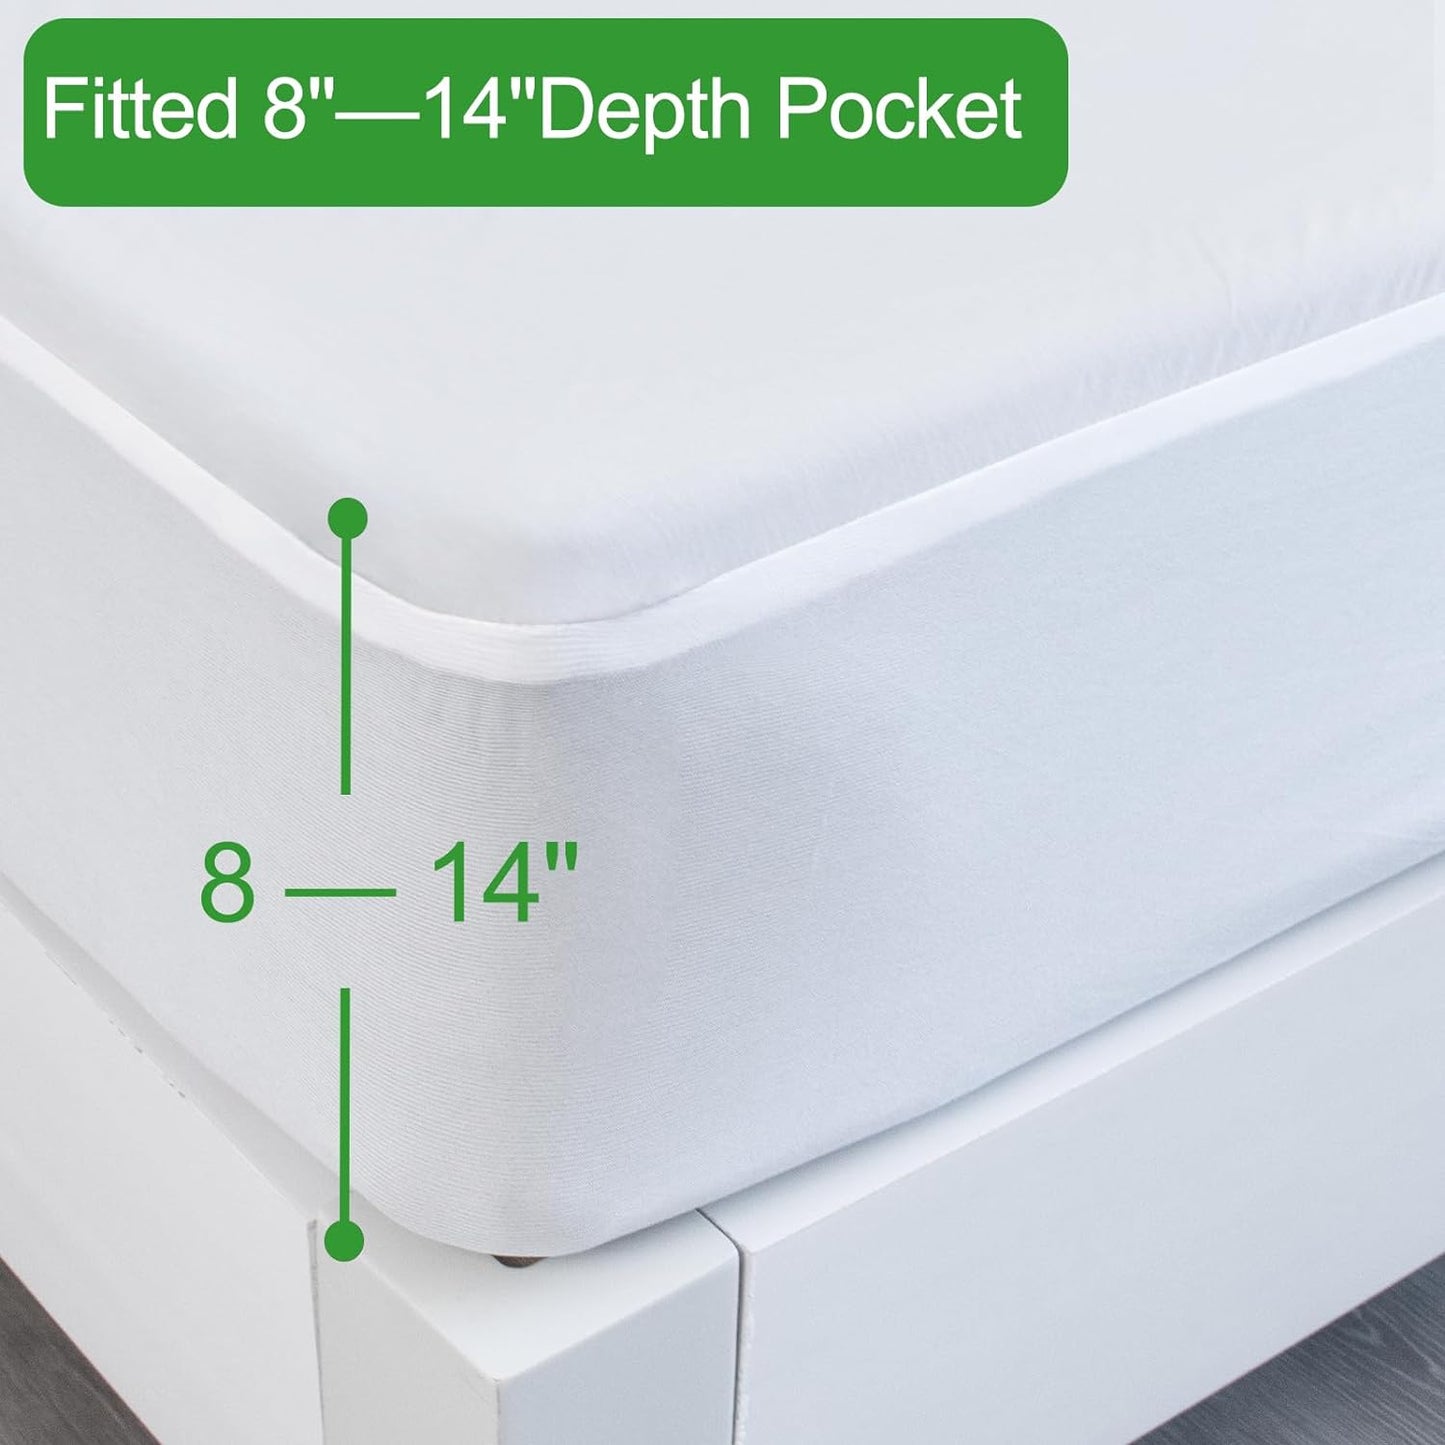 Waterproof Mattress Protector Full Size, 10 Pack, Premium Bamboo Mattress Pad Cover Fitted with Deep Pocket Up to 14" Depth